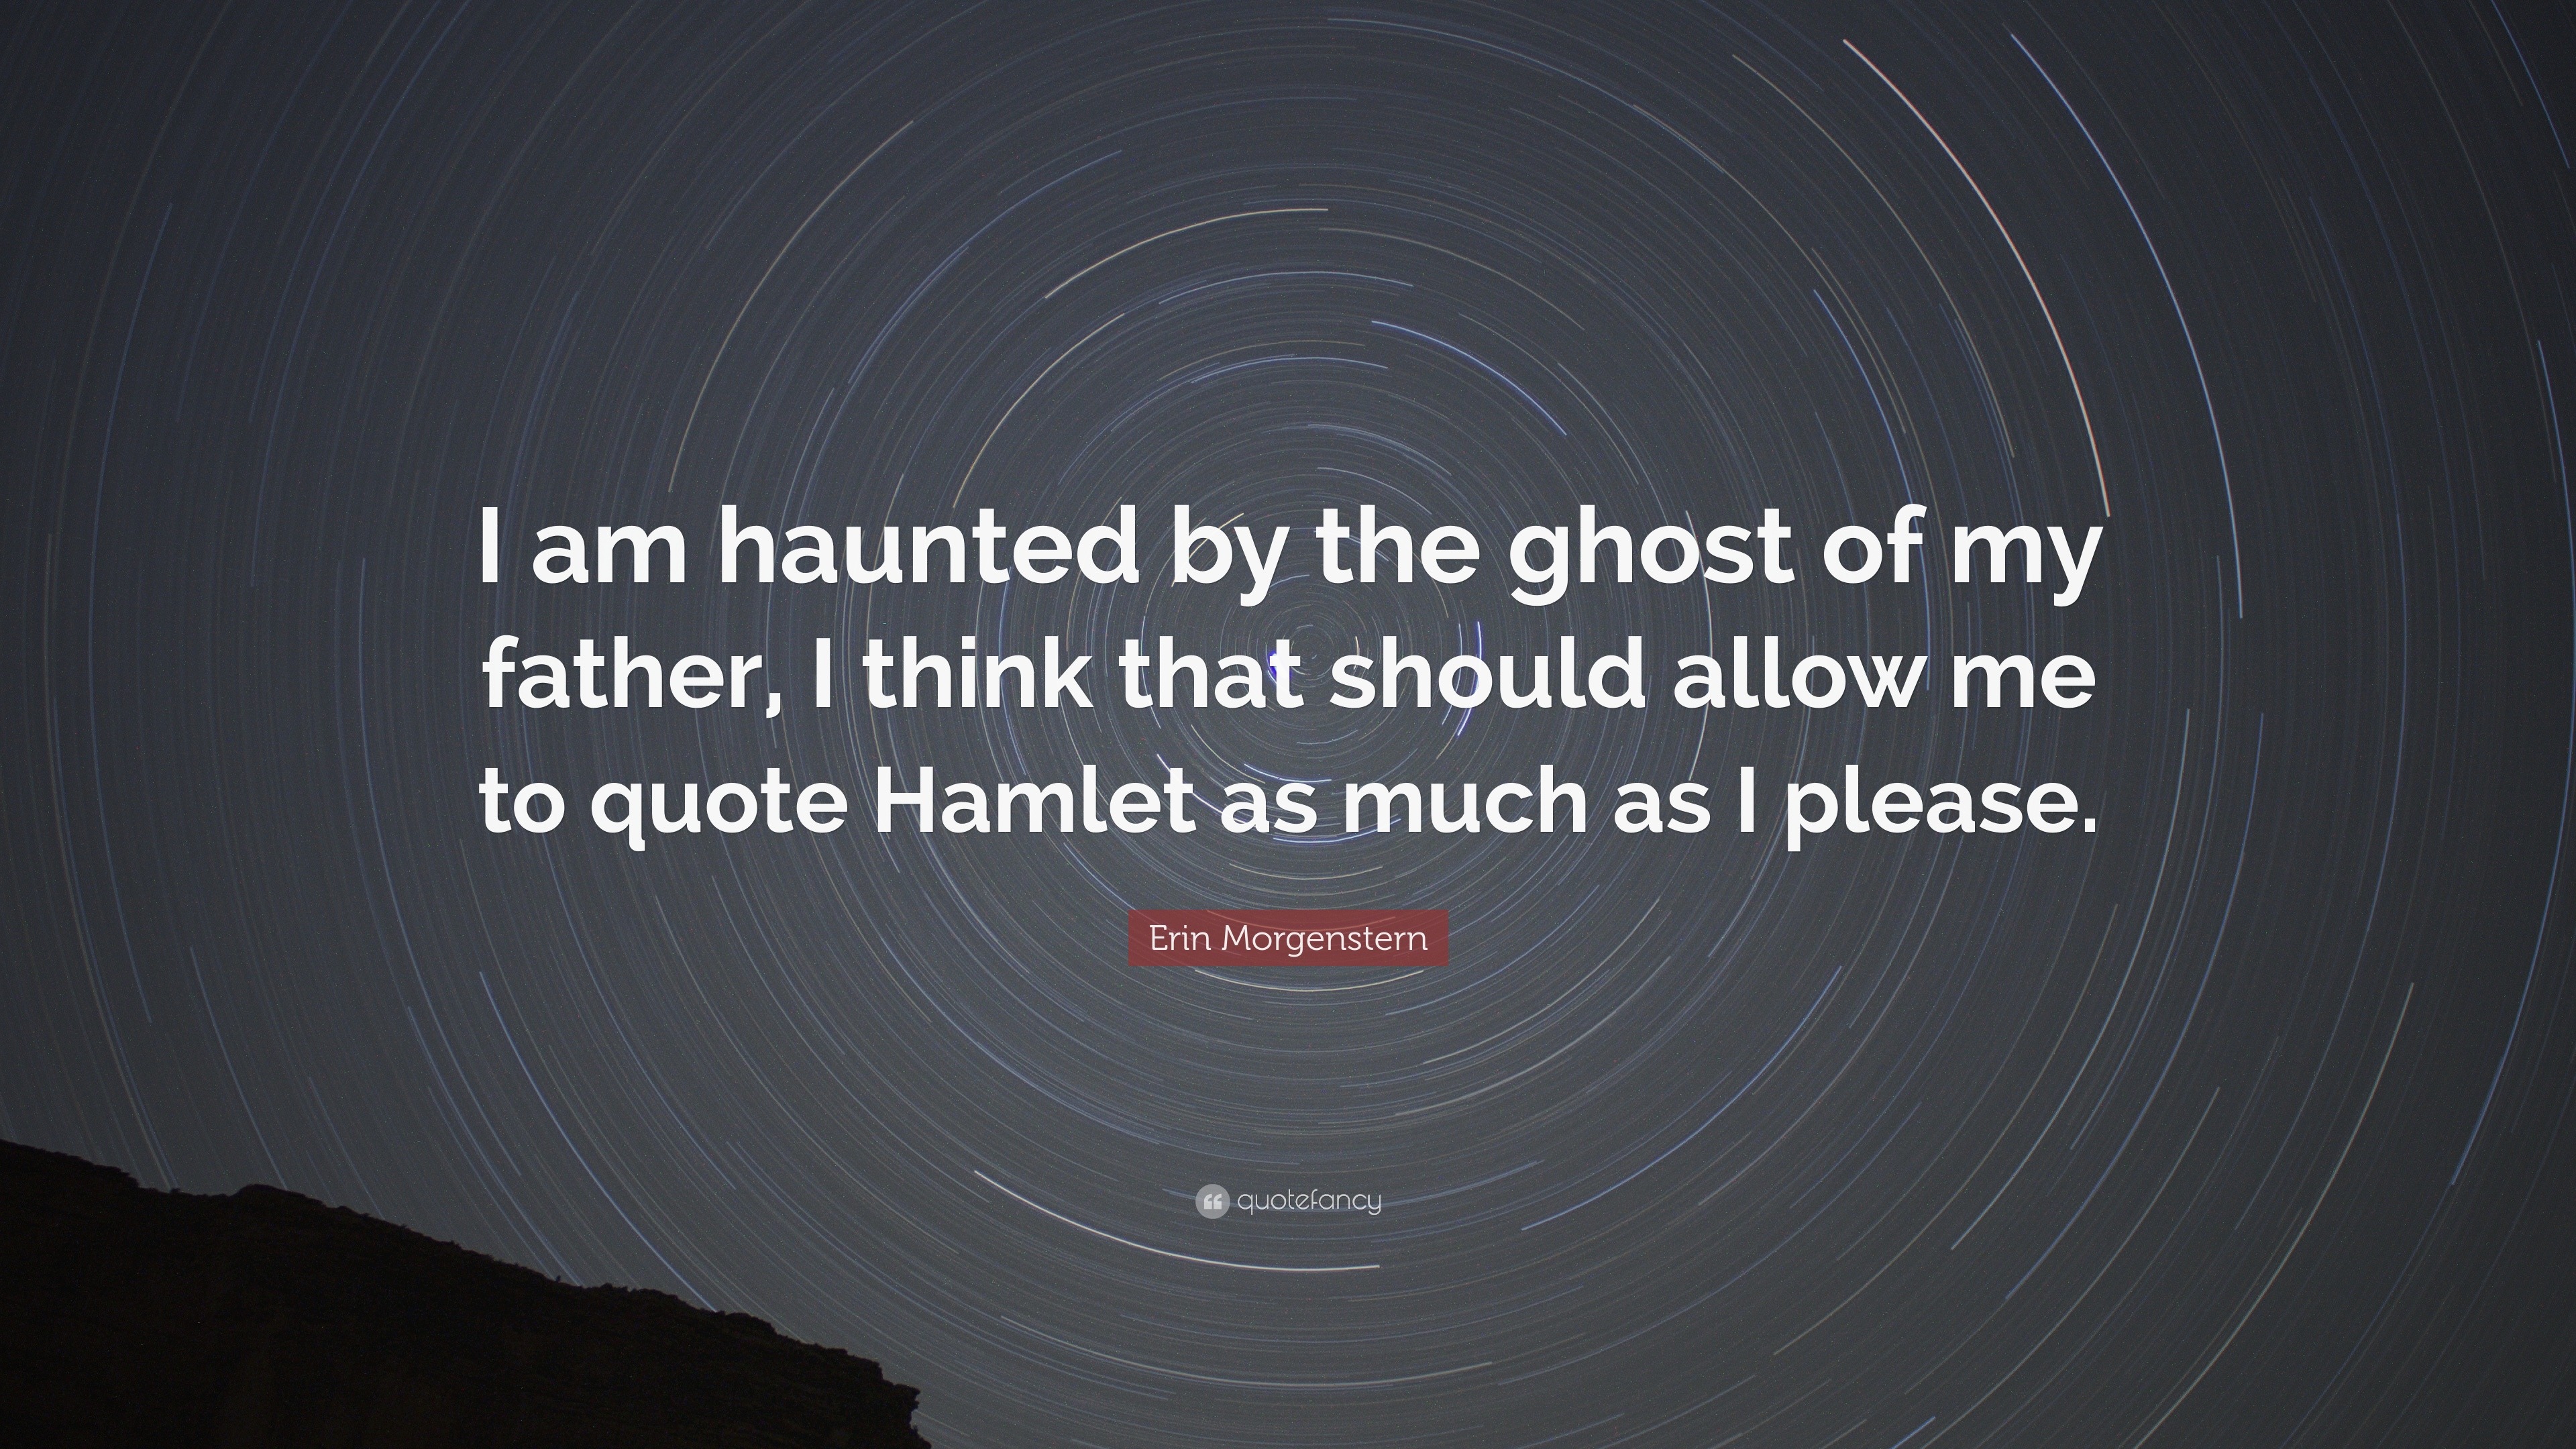 Erin Morgenstern Quote: “I am haunted by the ghost of my father, I